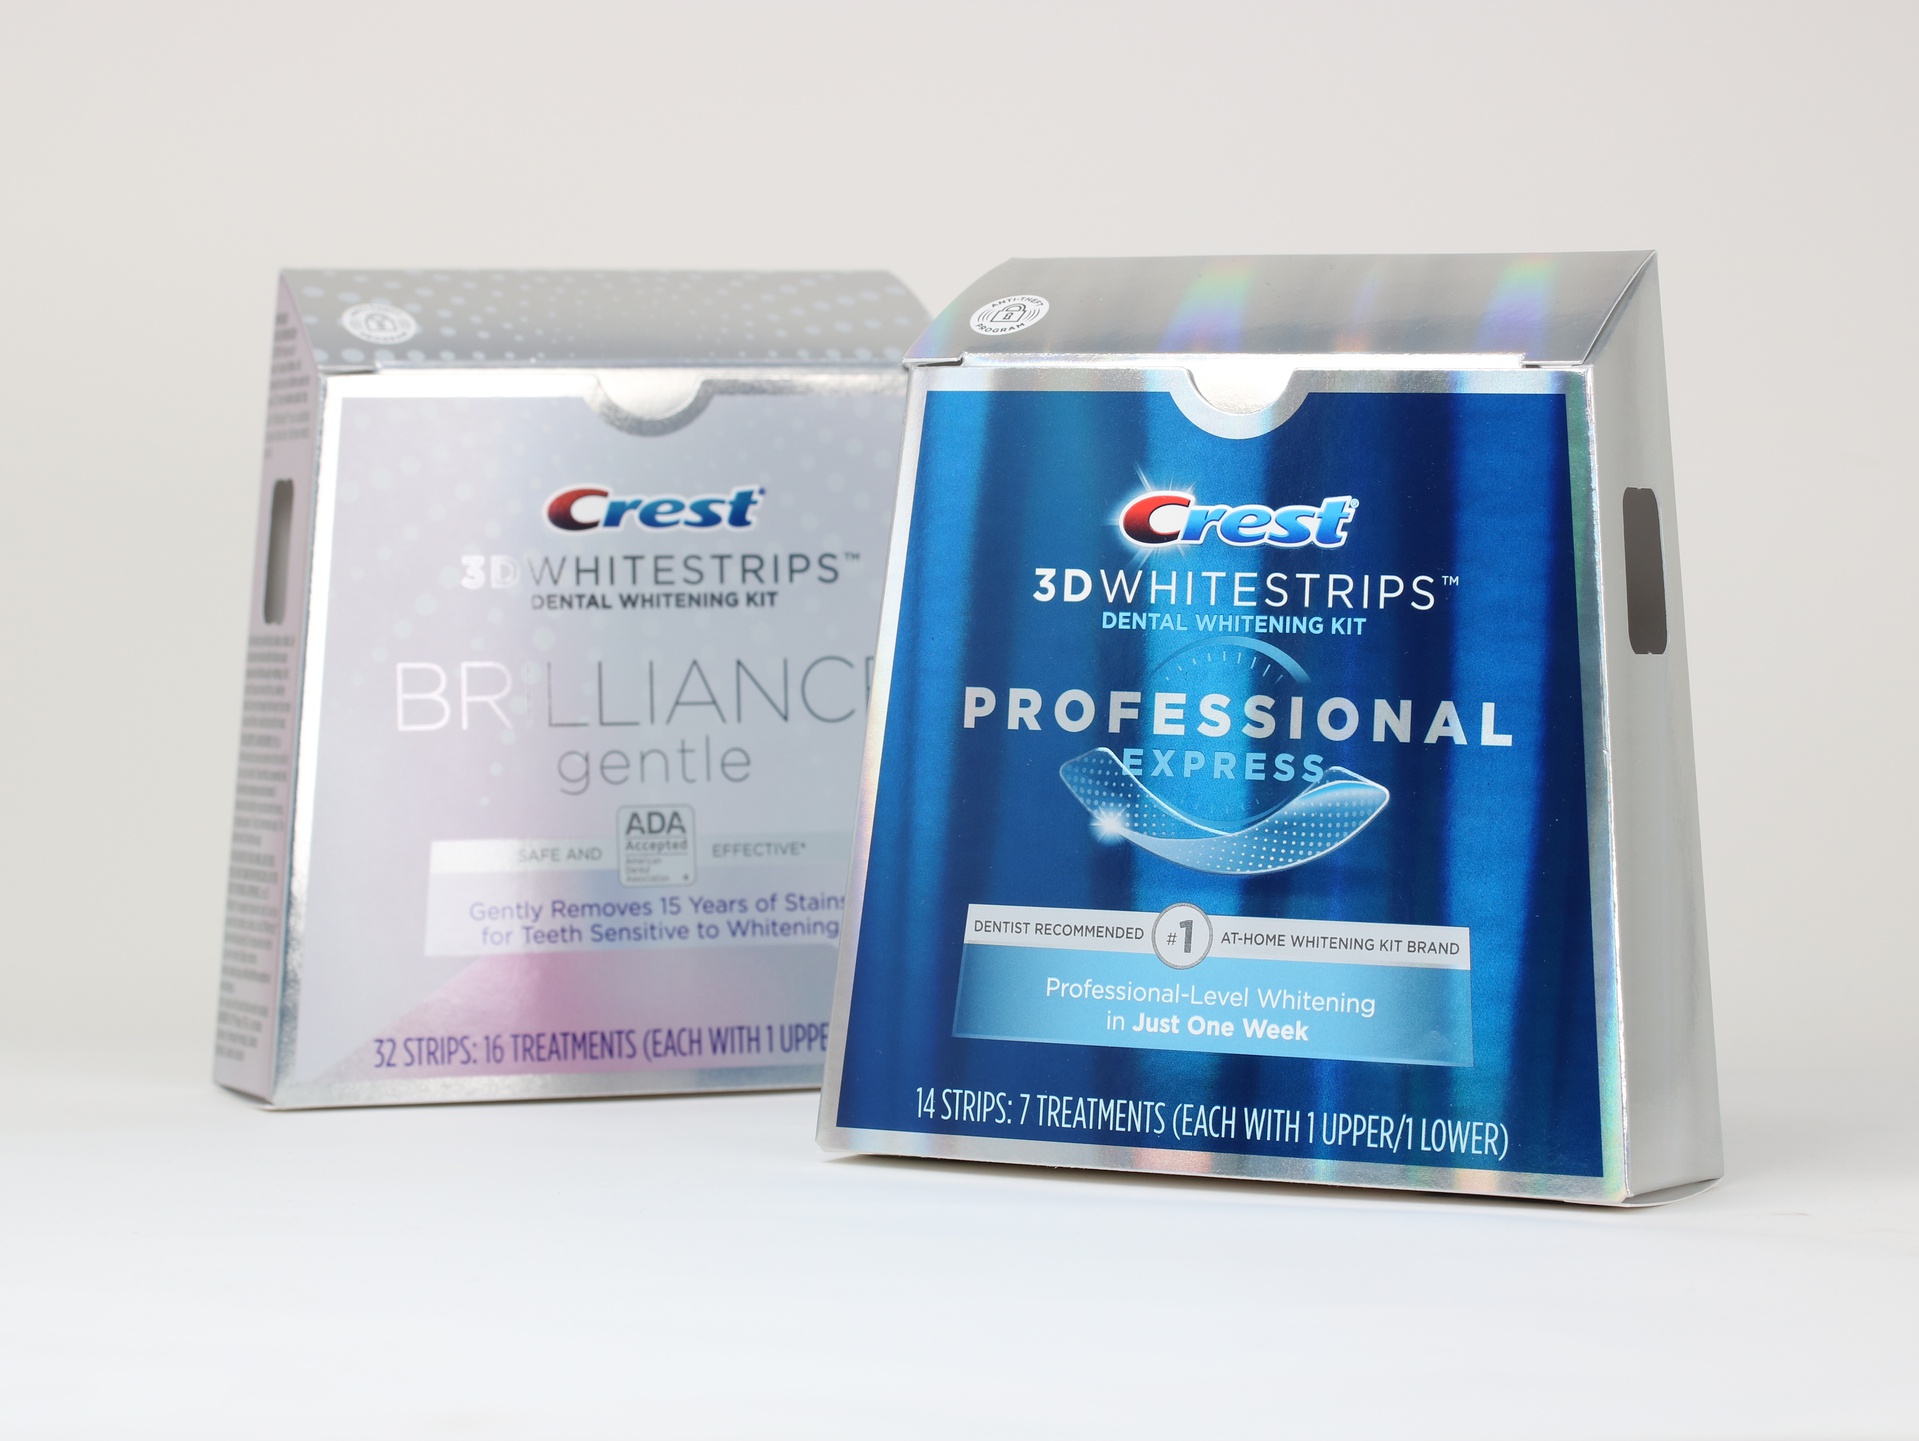 Crest 3D Whitestrips packaging features cold foil and overprinting with UV inks